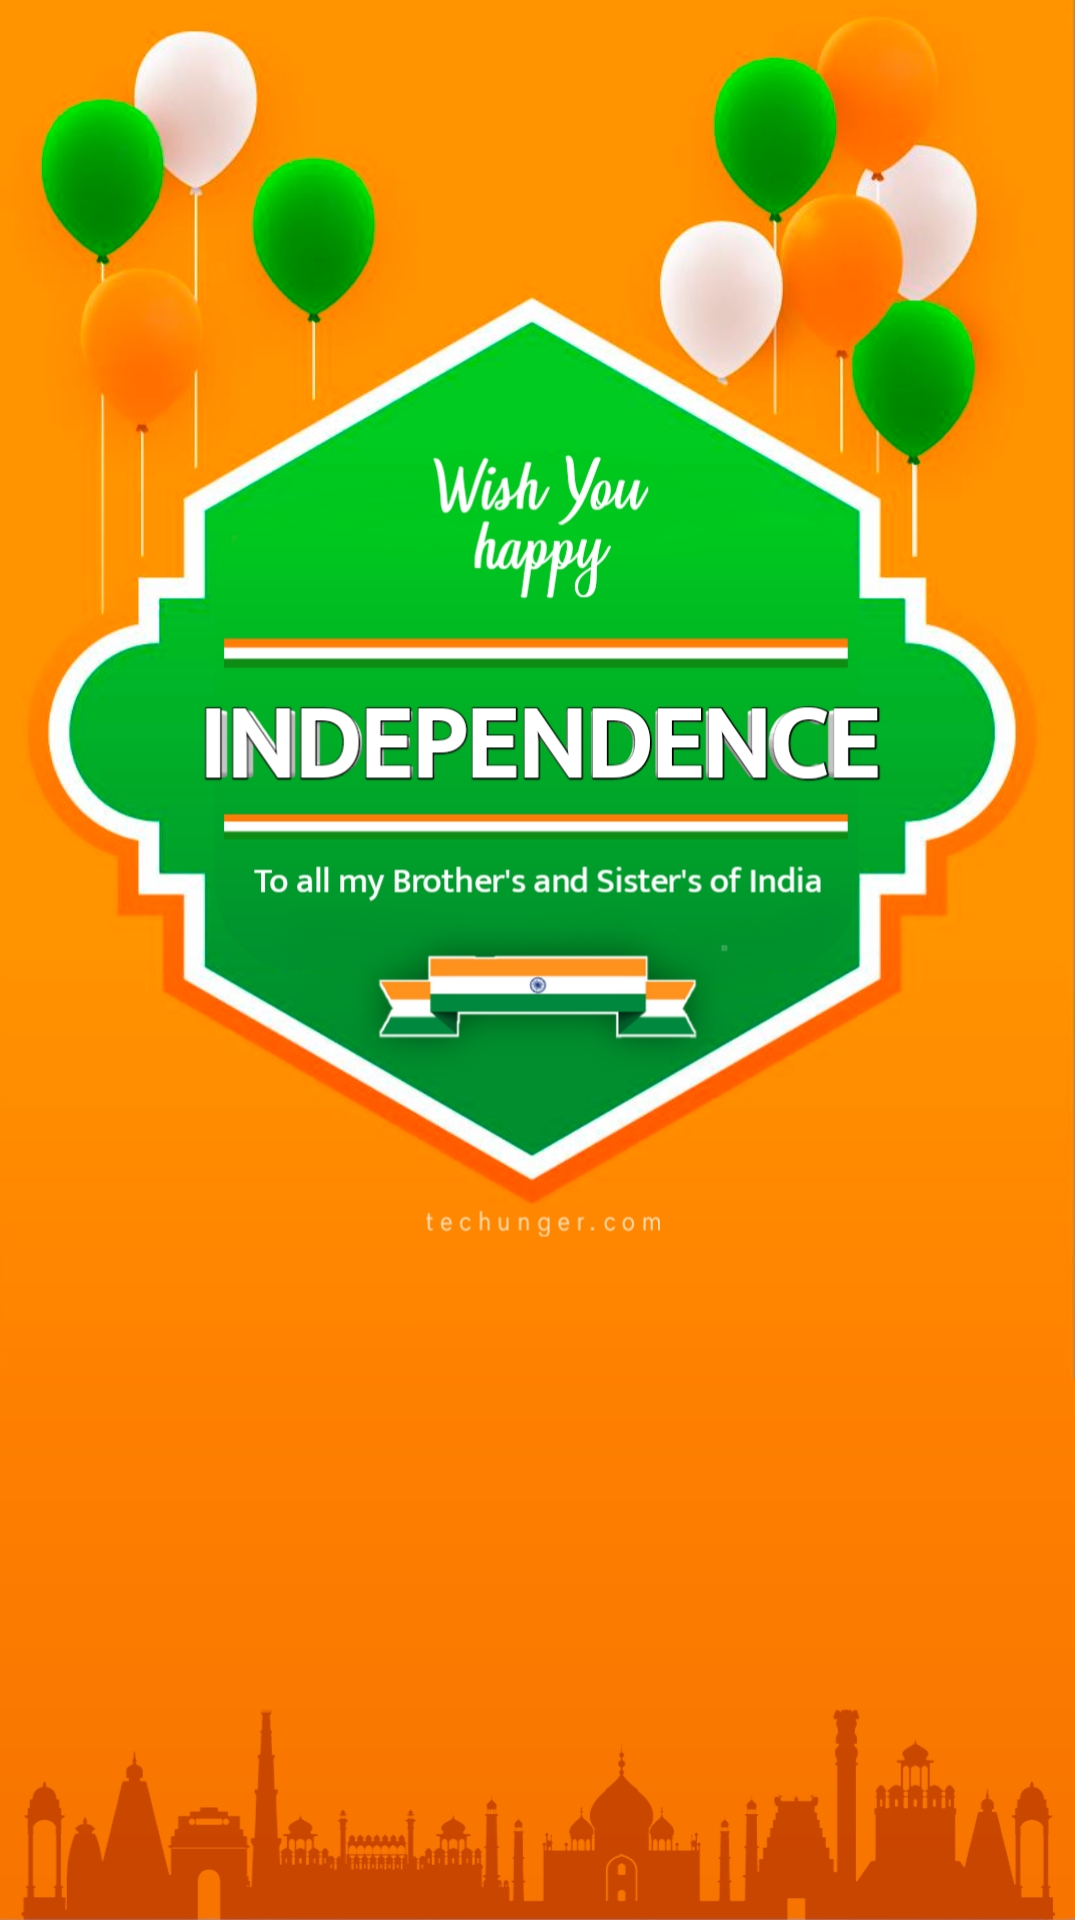 independence day drawing, independence day poster, independence day speech, independence day drawing ideas, independence day quotes, independence day background, independence day essay in english, independence day poem, independence day images, independence day activity, independence day art, independence day ads, independence day article, independence day baby photoshoot, independence day background for editing, independence day banner, independence day background hd, independence day border design, independence day bird drawing, independence day best drawing, independence day card, independence day celebration, techunger, saurabh chaudhari, independence day banner with my name, independence day banner with name *